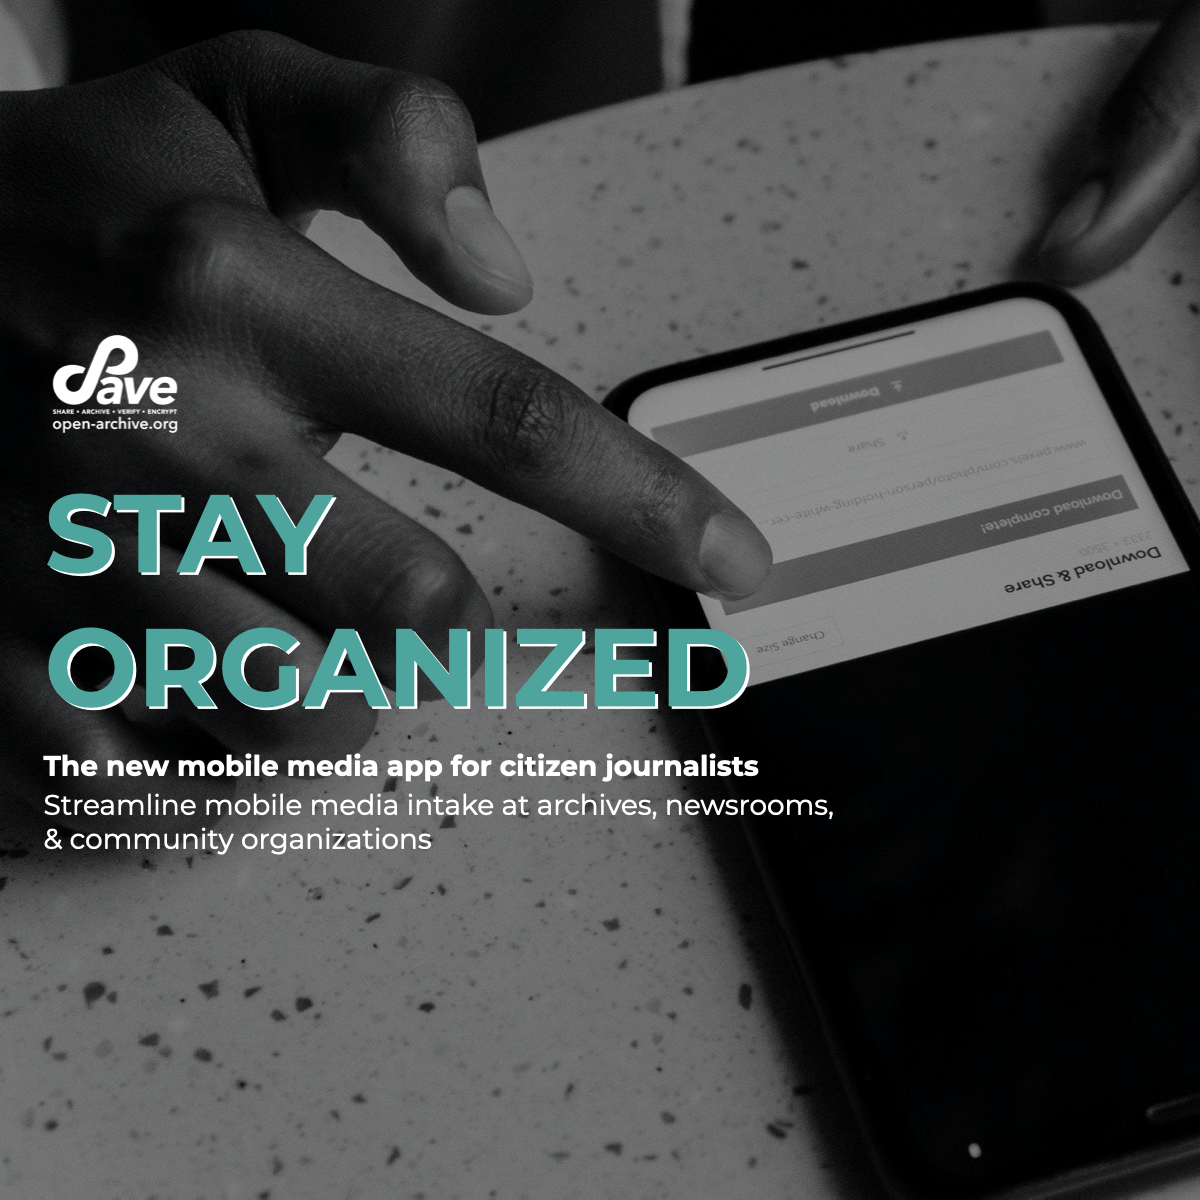 Stay organized by OpenArchive